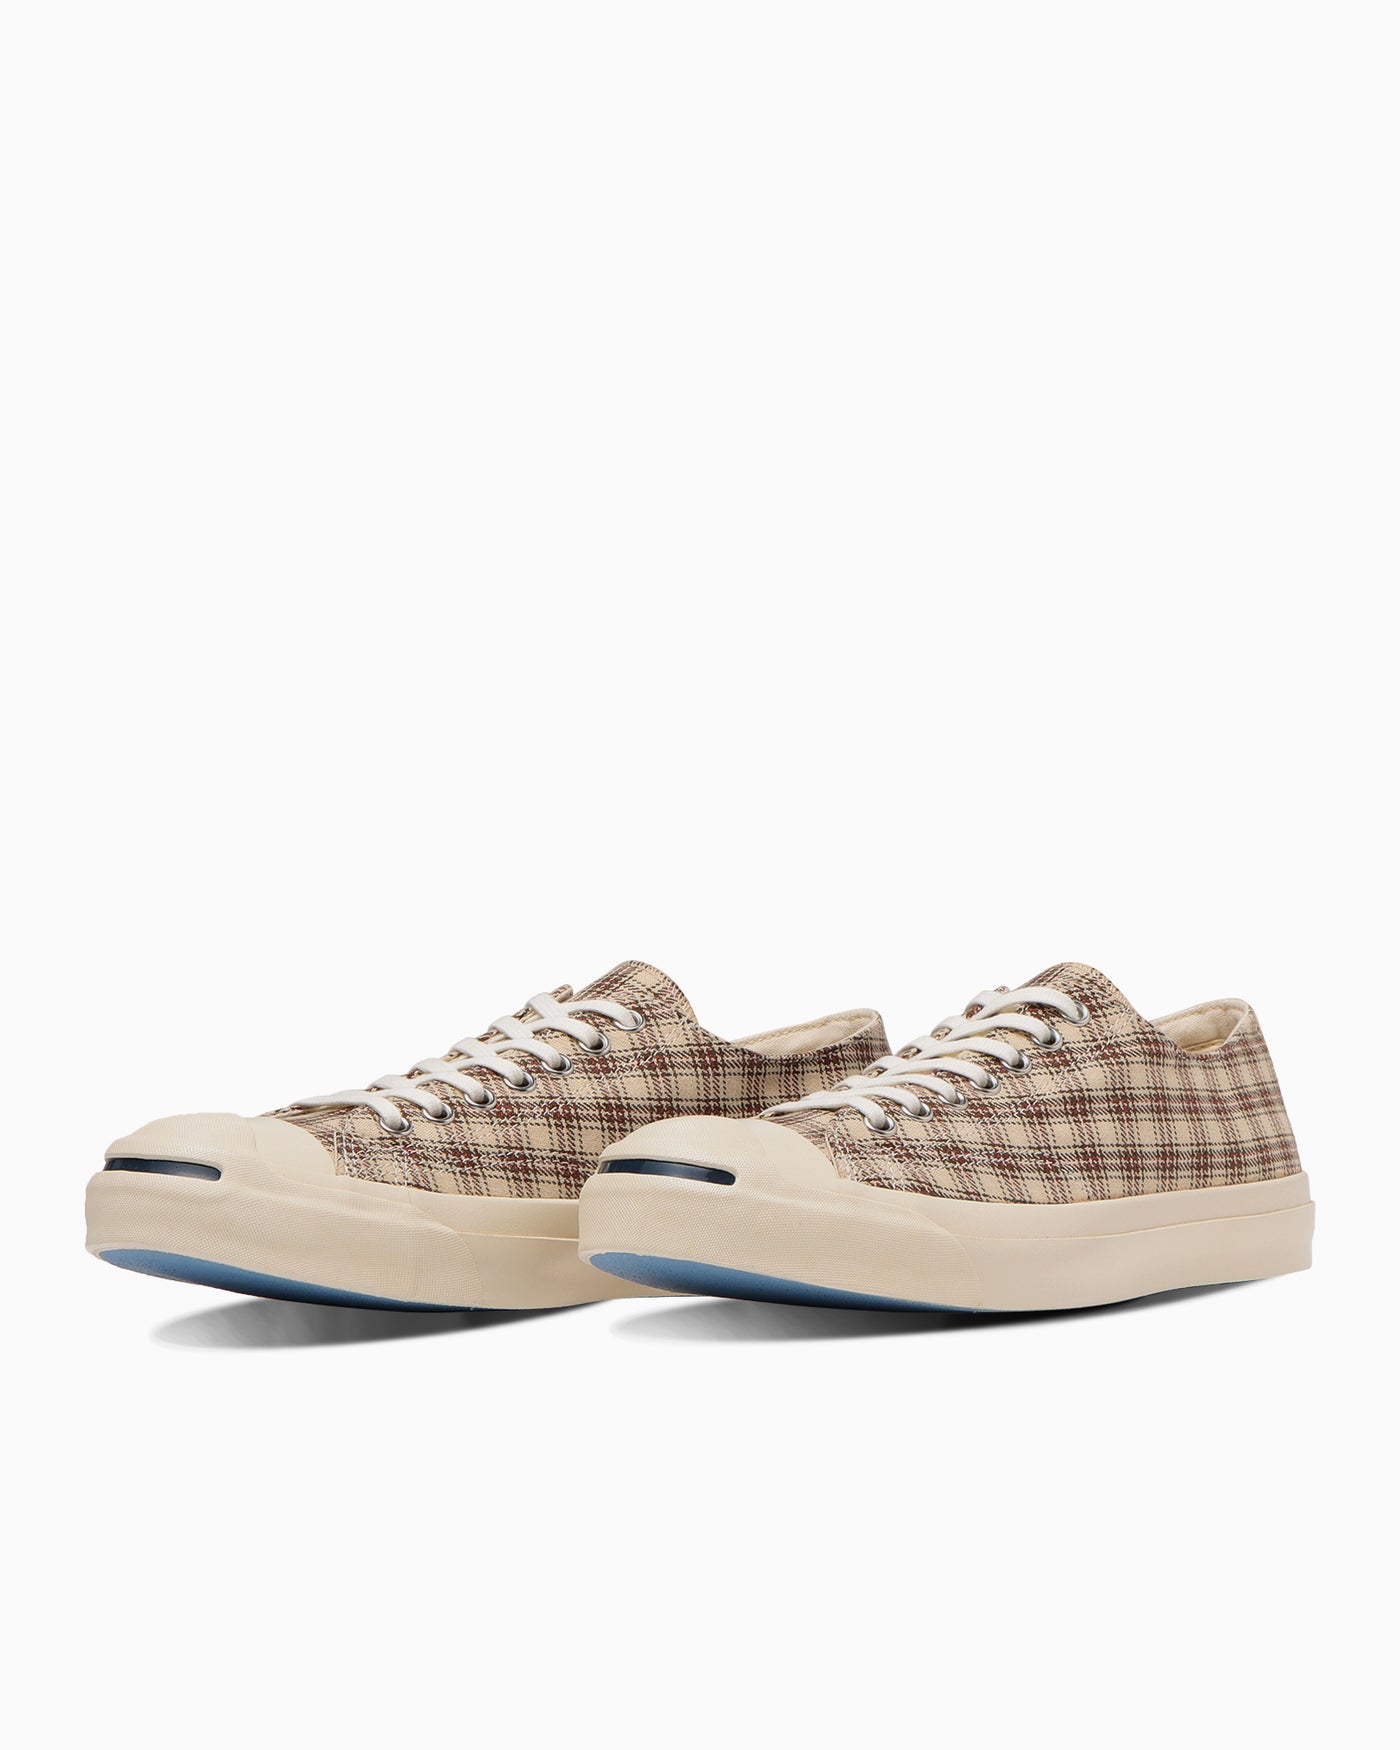 JACK PURCELL US CHECK